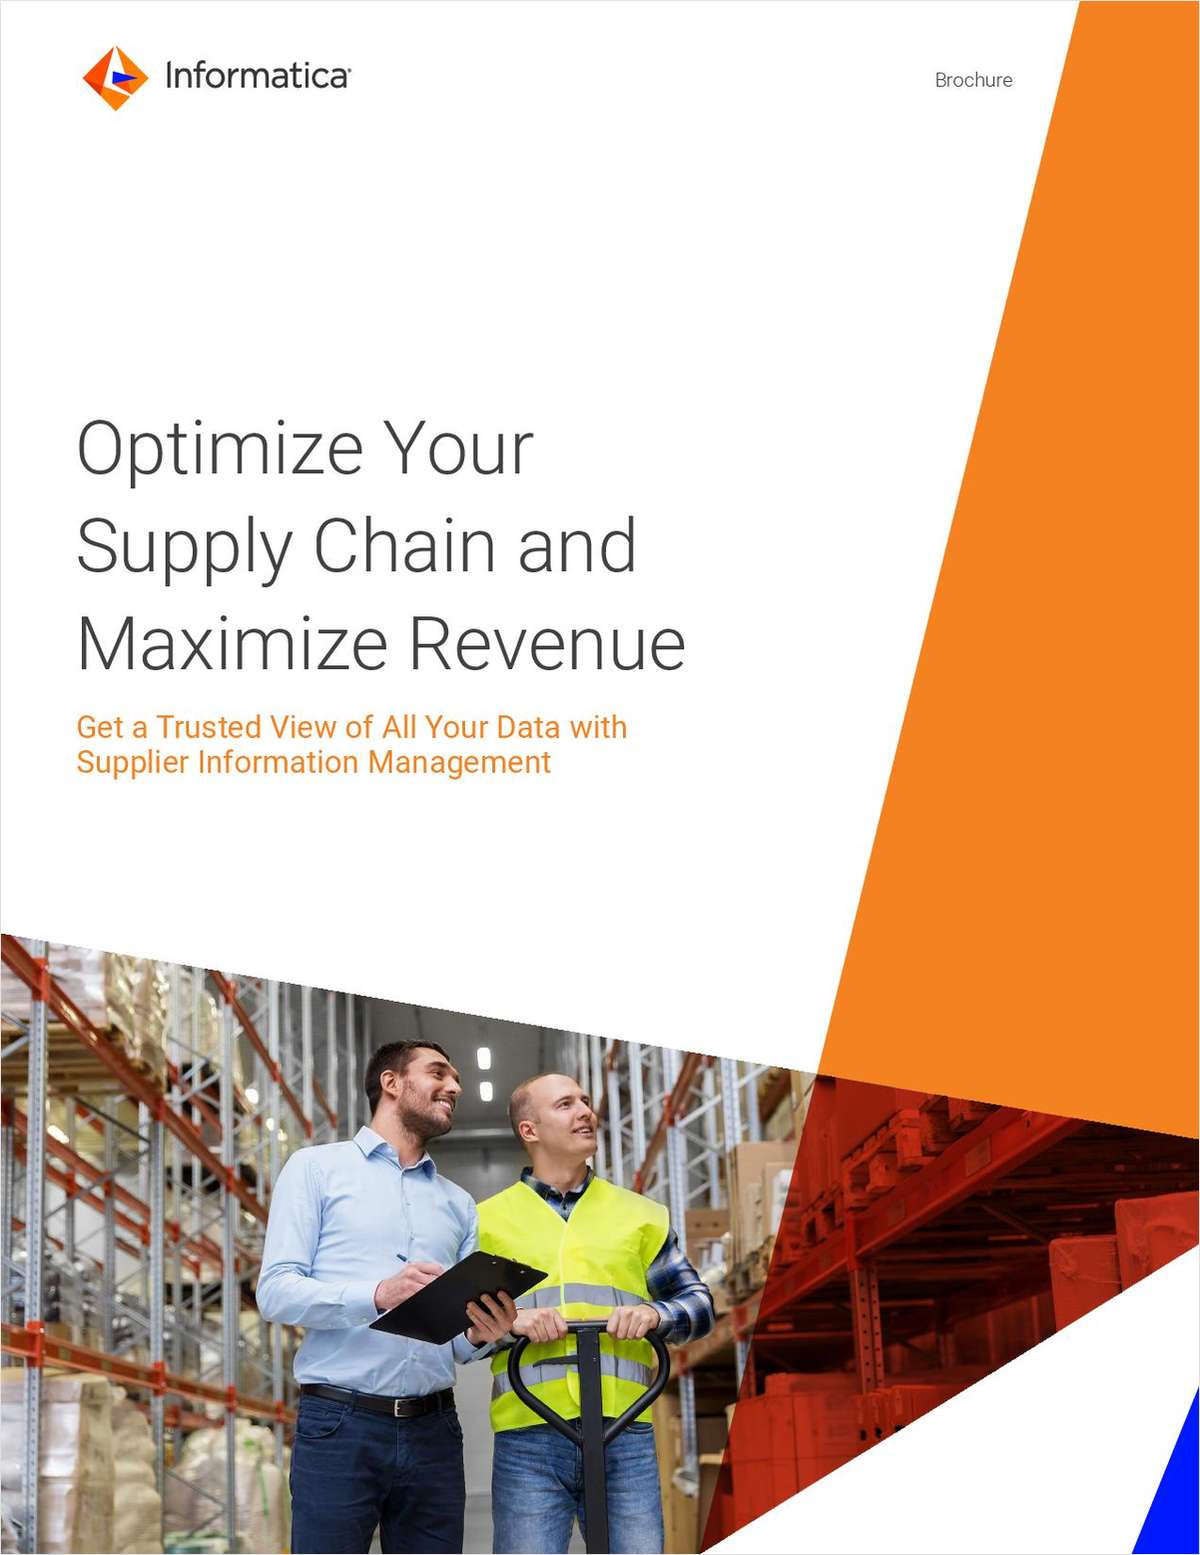 Optimize Your Supply Chain and Maximize Revenue